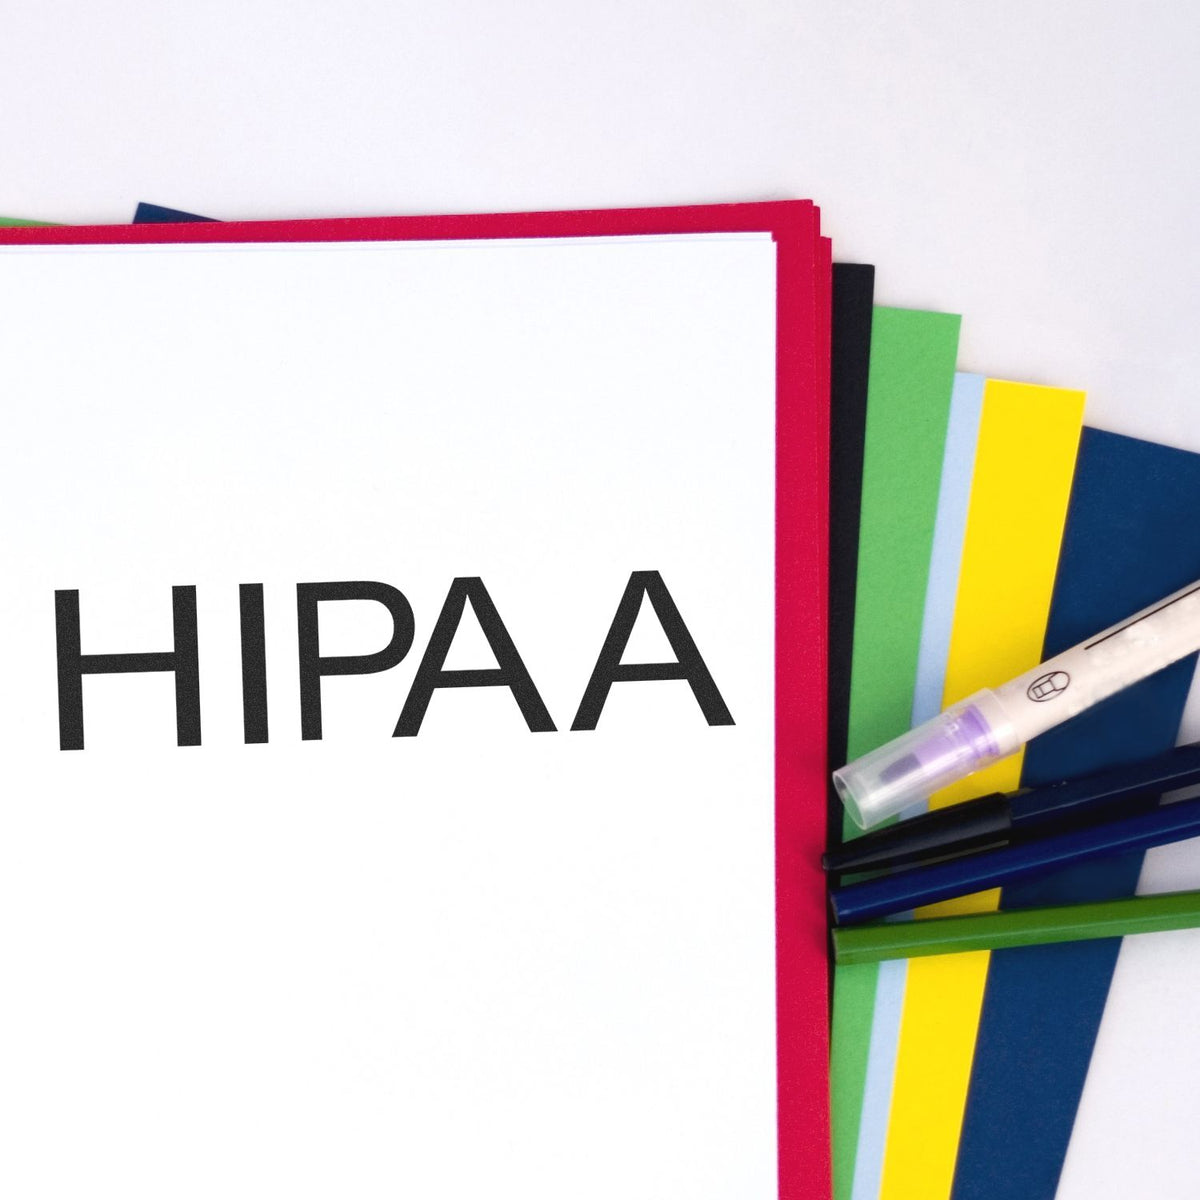 Large Hipaa Rubber Stamp Lifestyle Photo